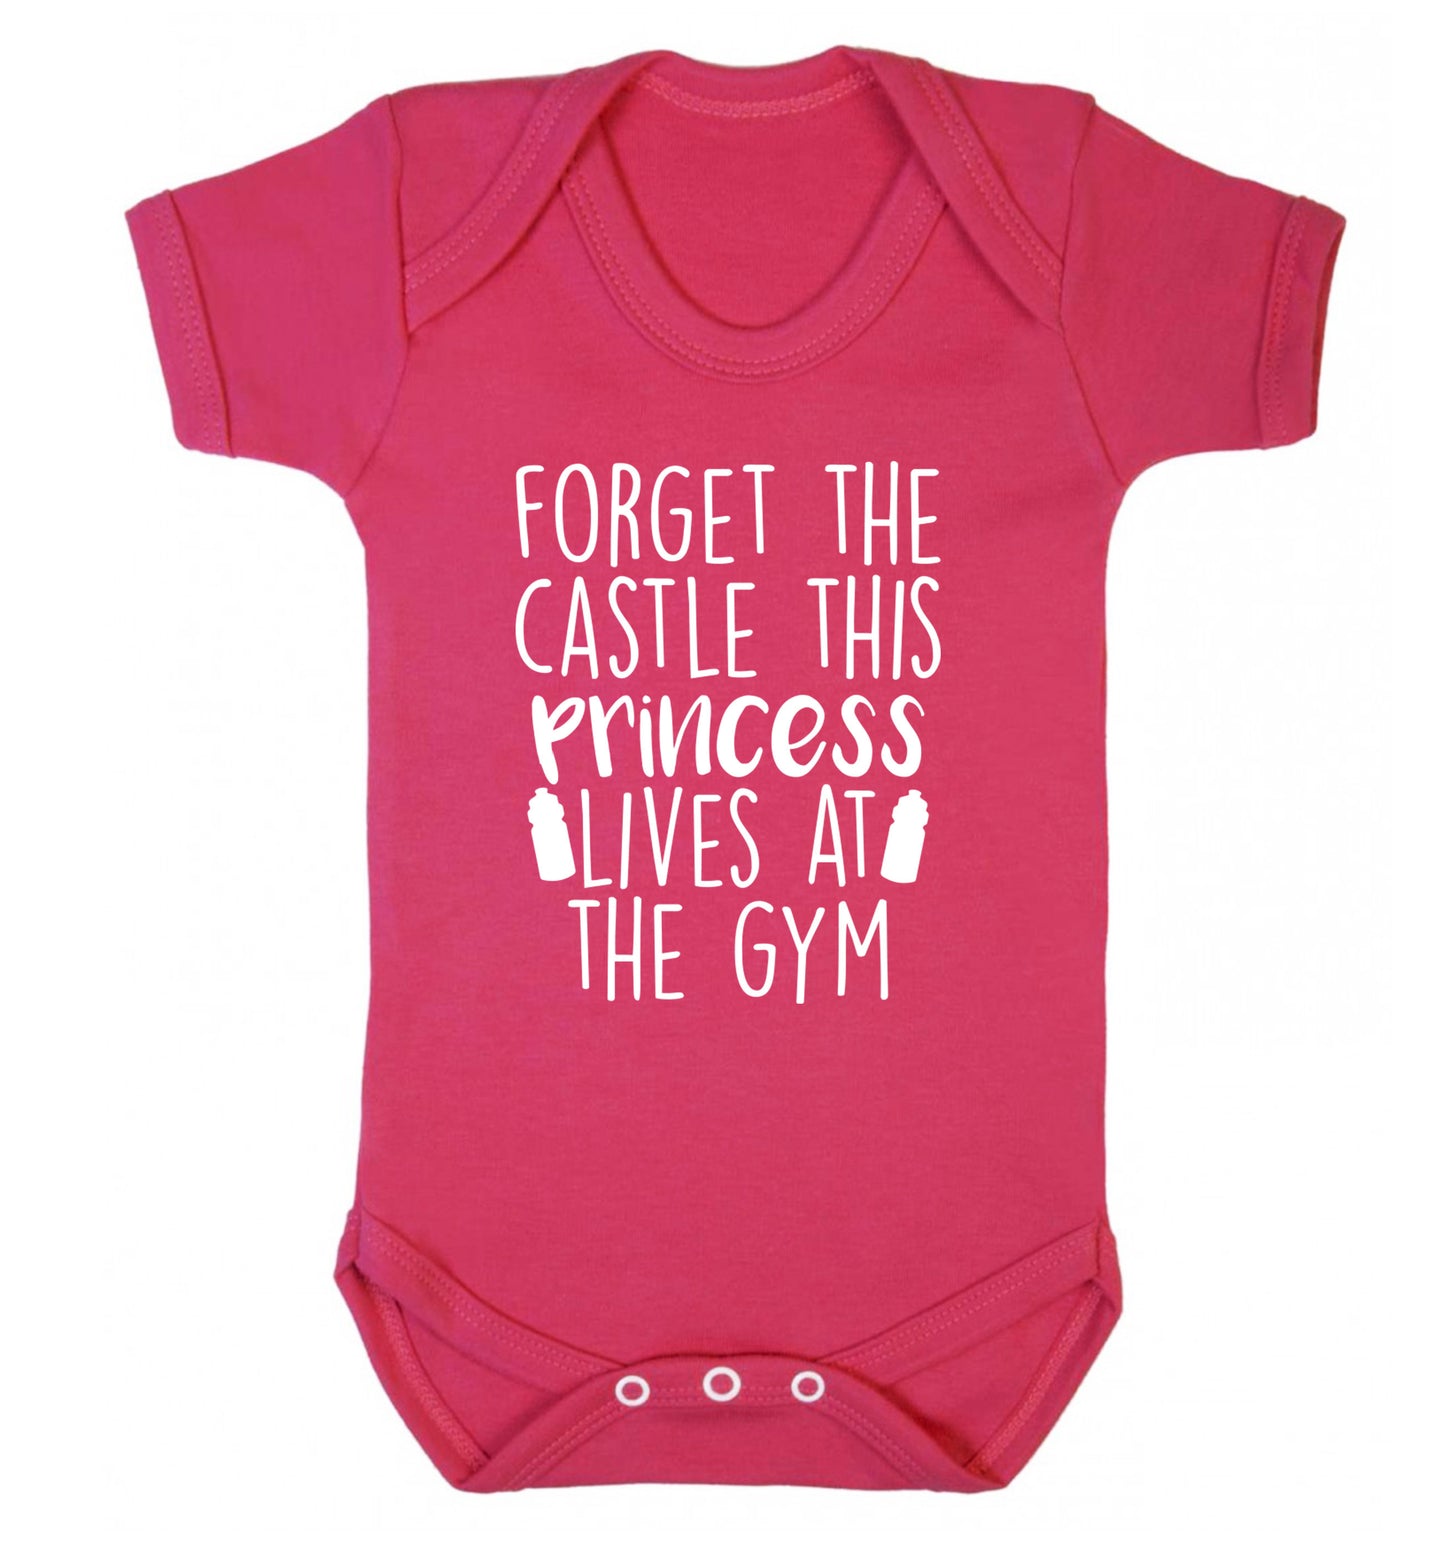 Forget the castle this princess lives at the gym Baby Vest dark pink 18-24 months